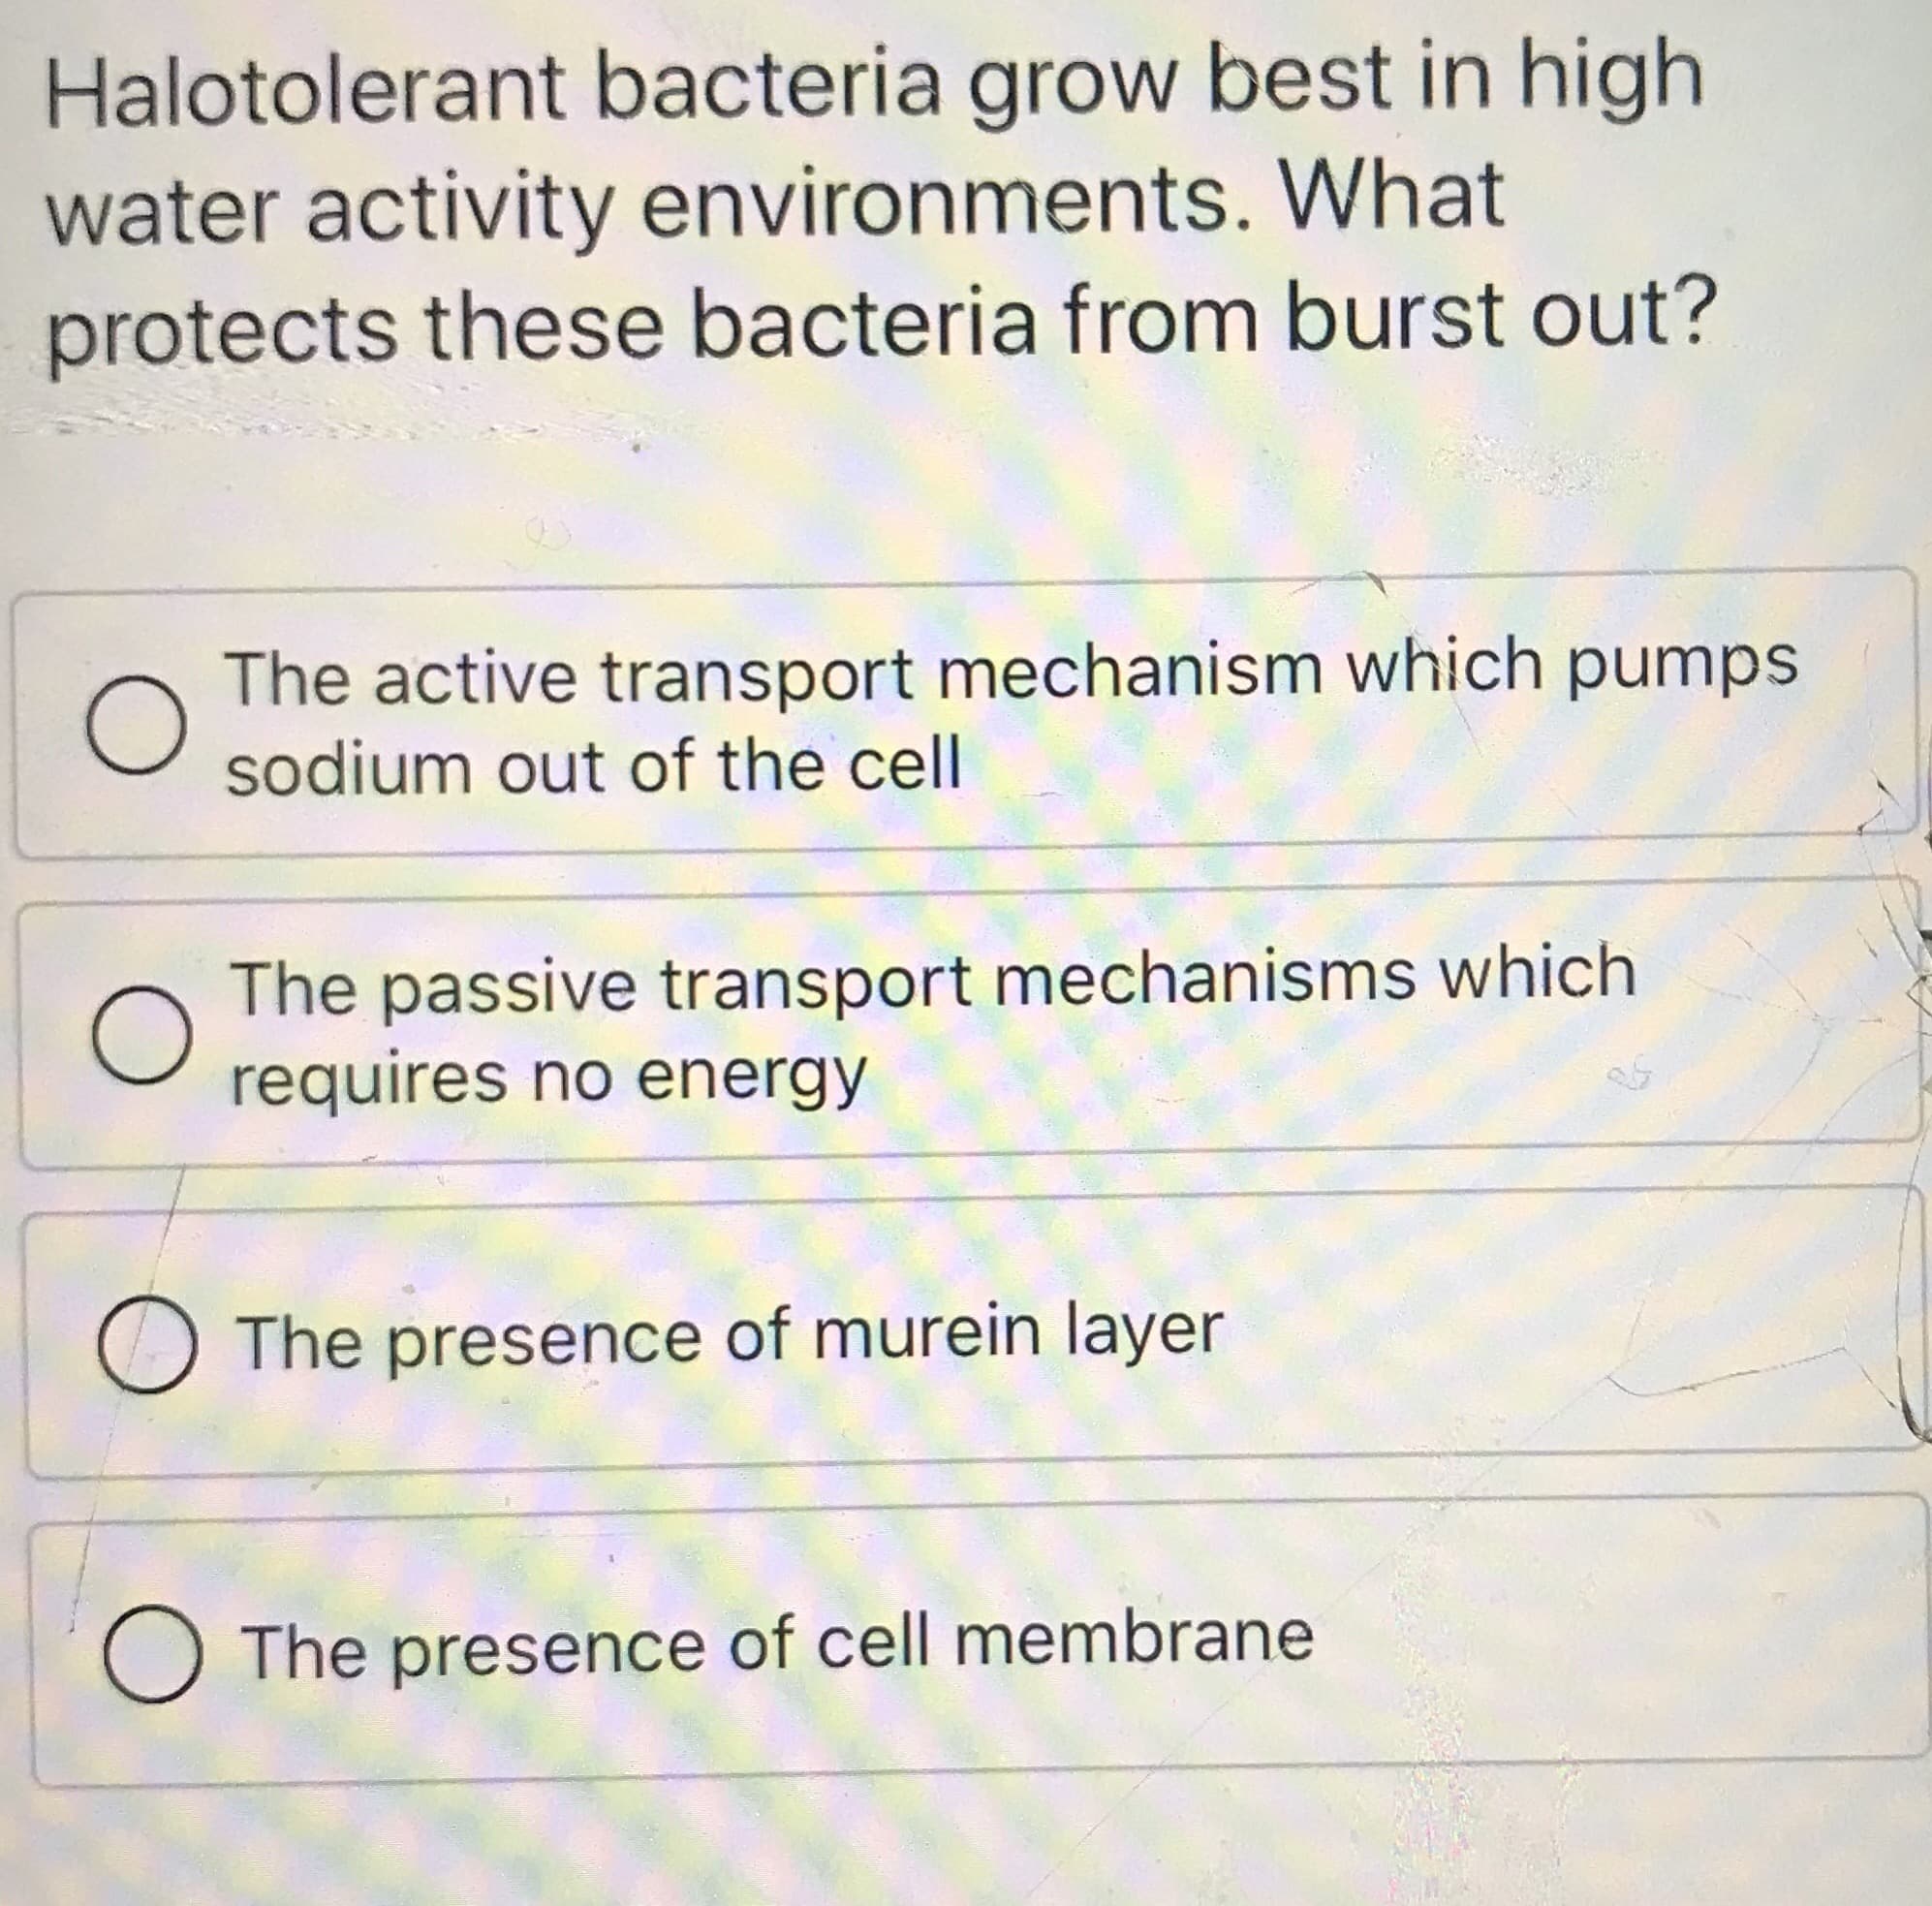 Halotolerant bacteria grow best in high
water activity environments. What
protects these bacteria from burst out?
The active transport mechanism which pumps
sodium out of the cell
The passive transport mechanisms which
requires no energy
O The presence of murein layer
